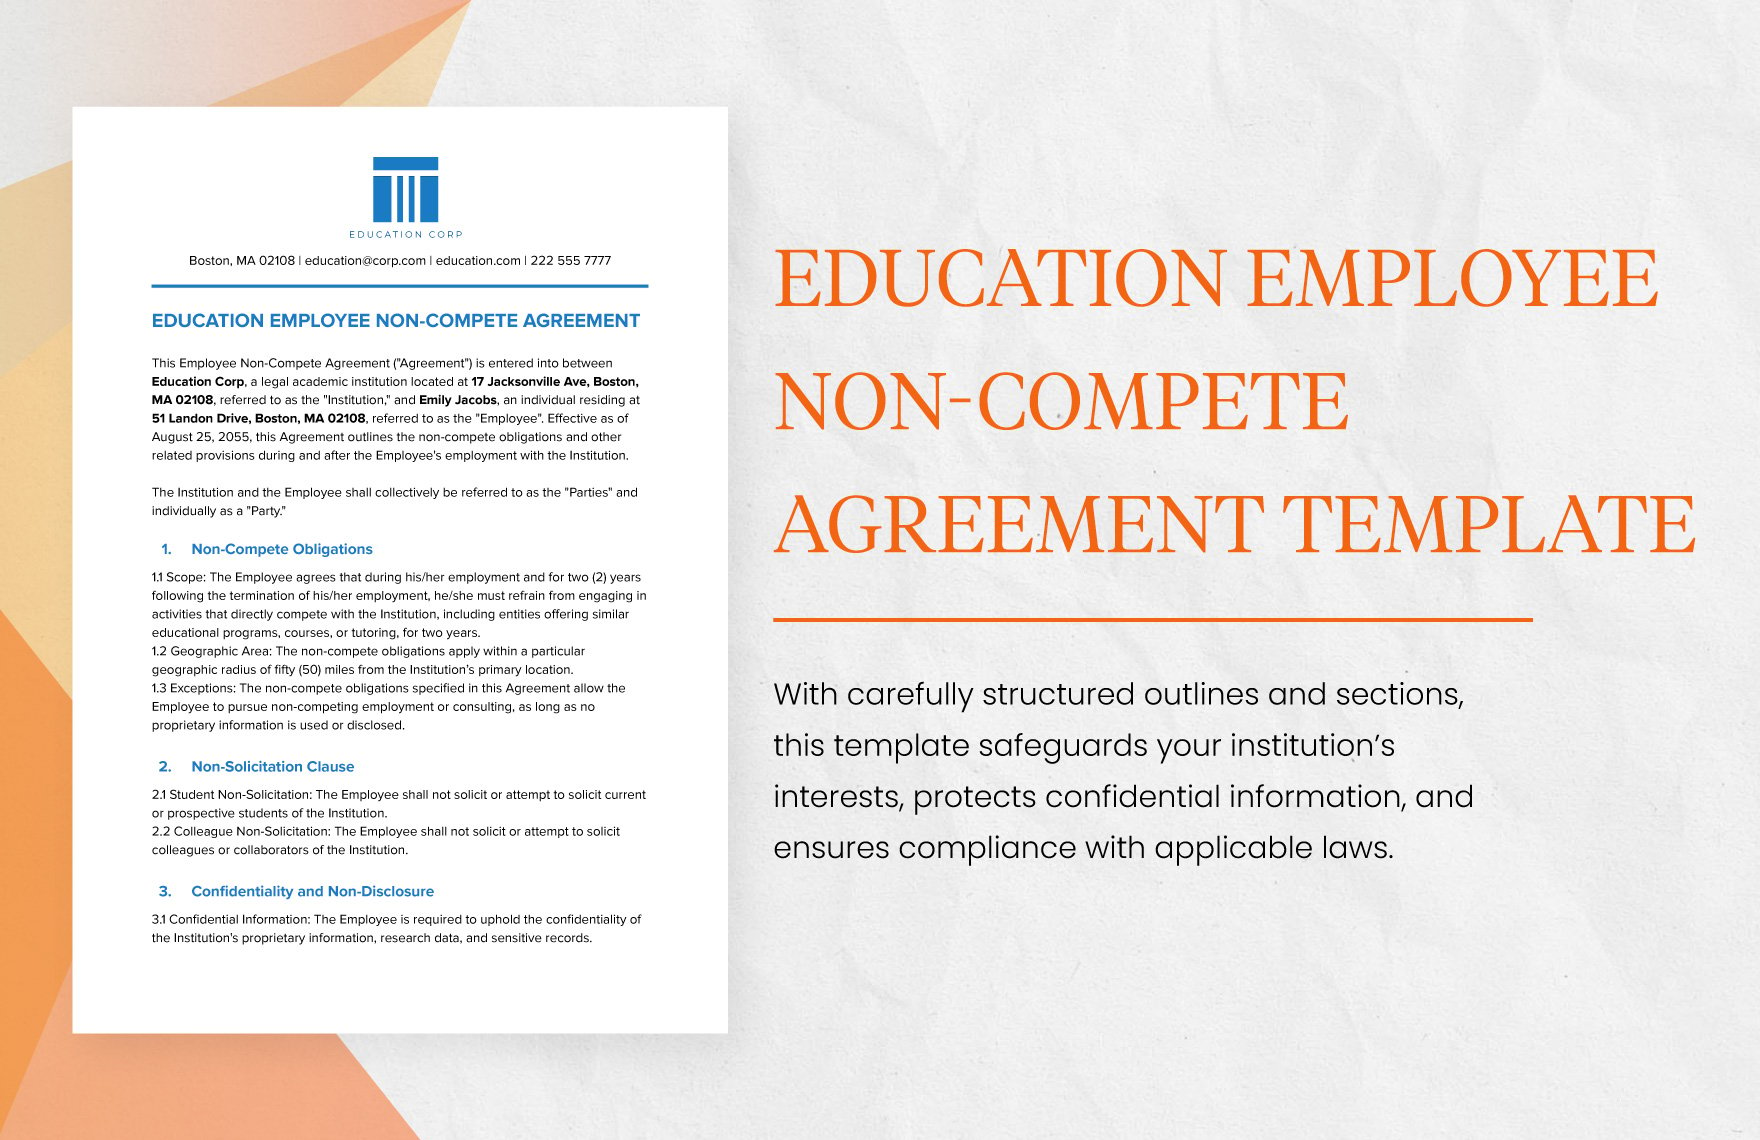 Education Employee Non-Compete Agreement Template